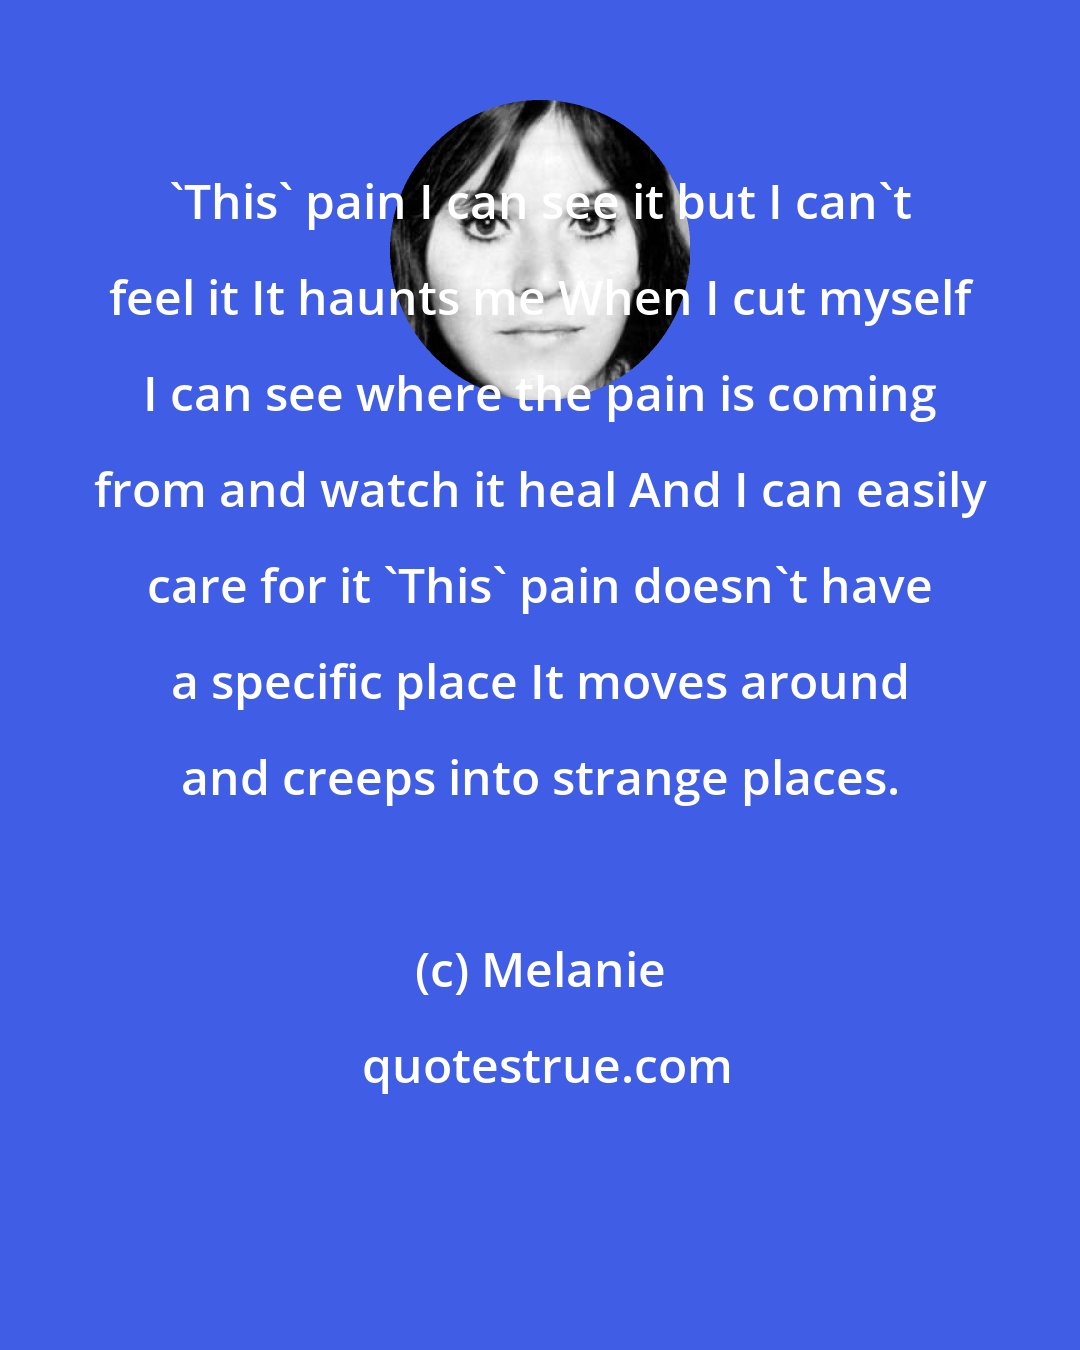 Melanie: 'This' pain I can see it but I can't feel it It haunts me When I cut myself I can see where the pain is coming from and watch it heal And I can easily care for it 'This' pain doesn't have a specific place It moves around and creeps into strange places.